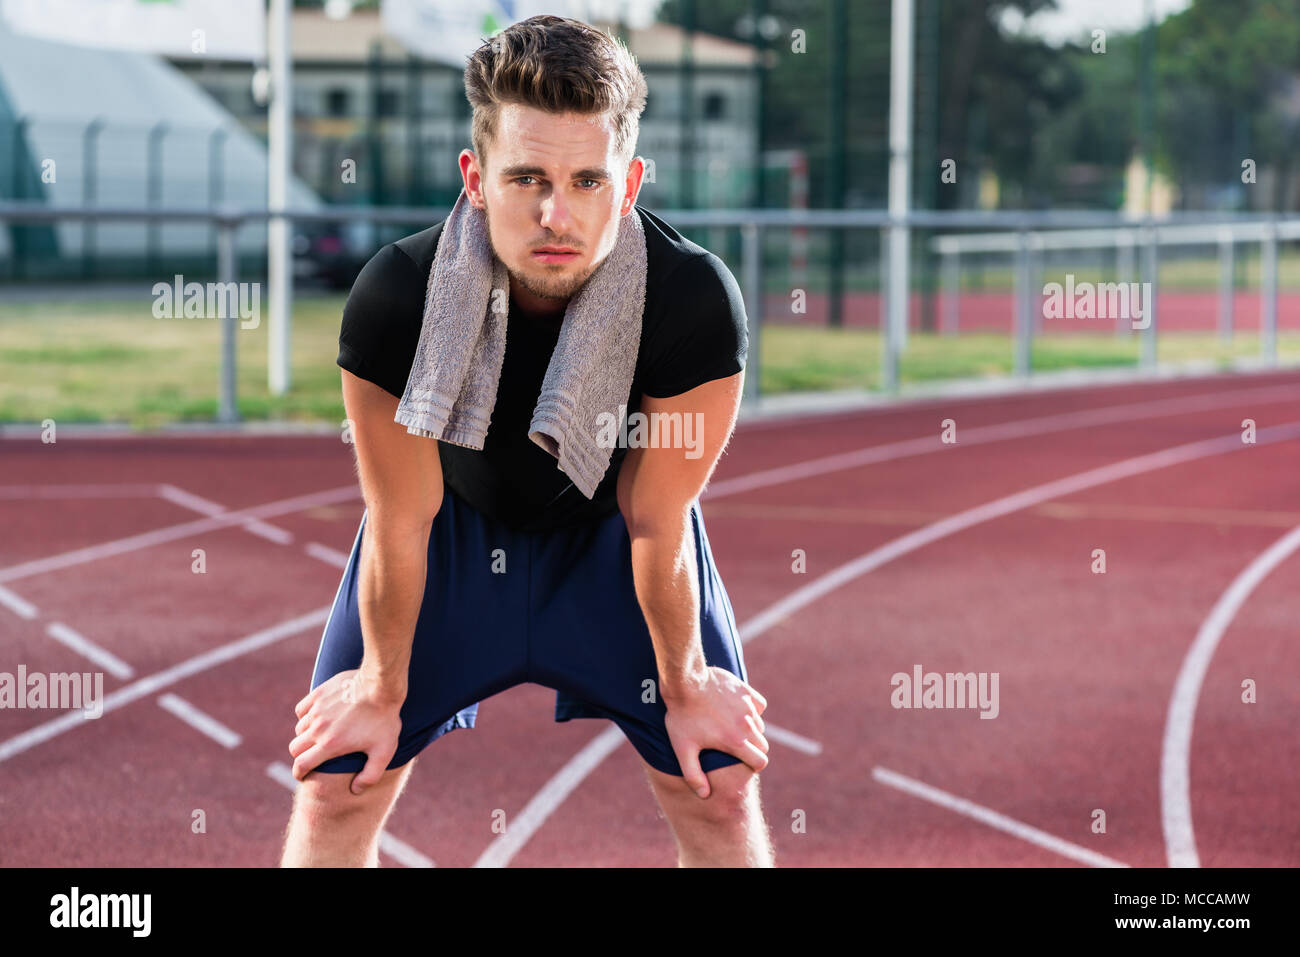 Athlete stretching on racing track before running Stock Photo